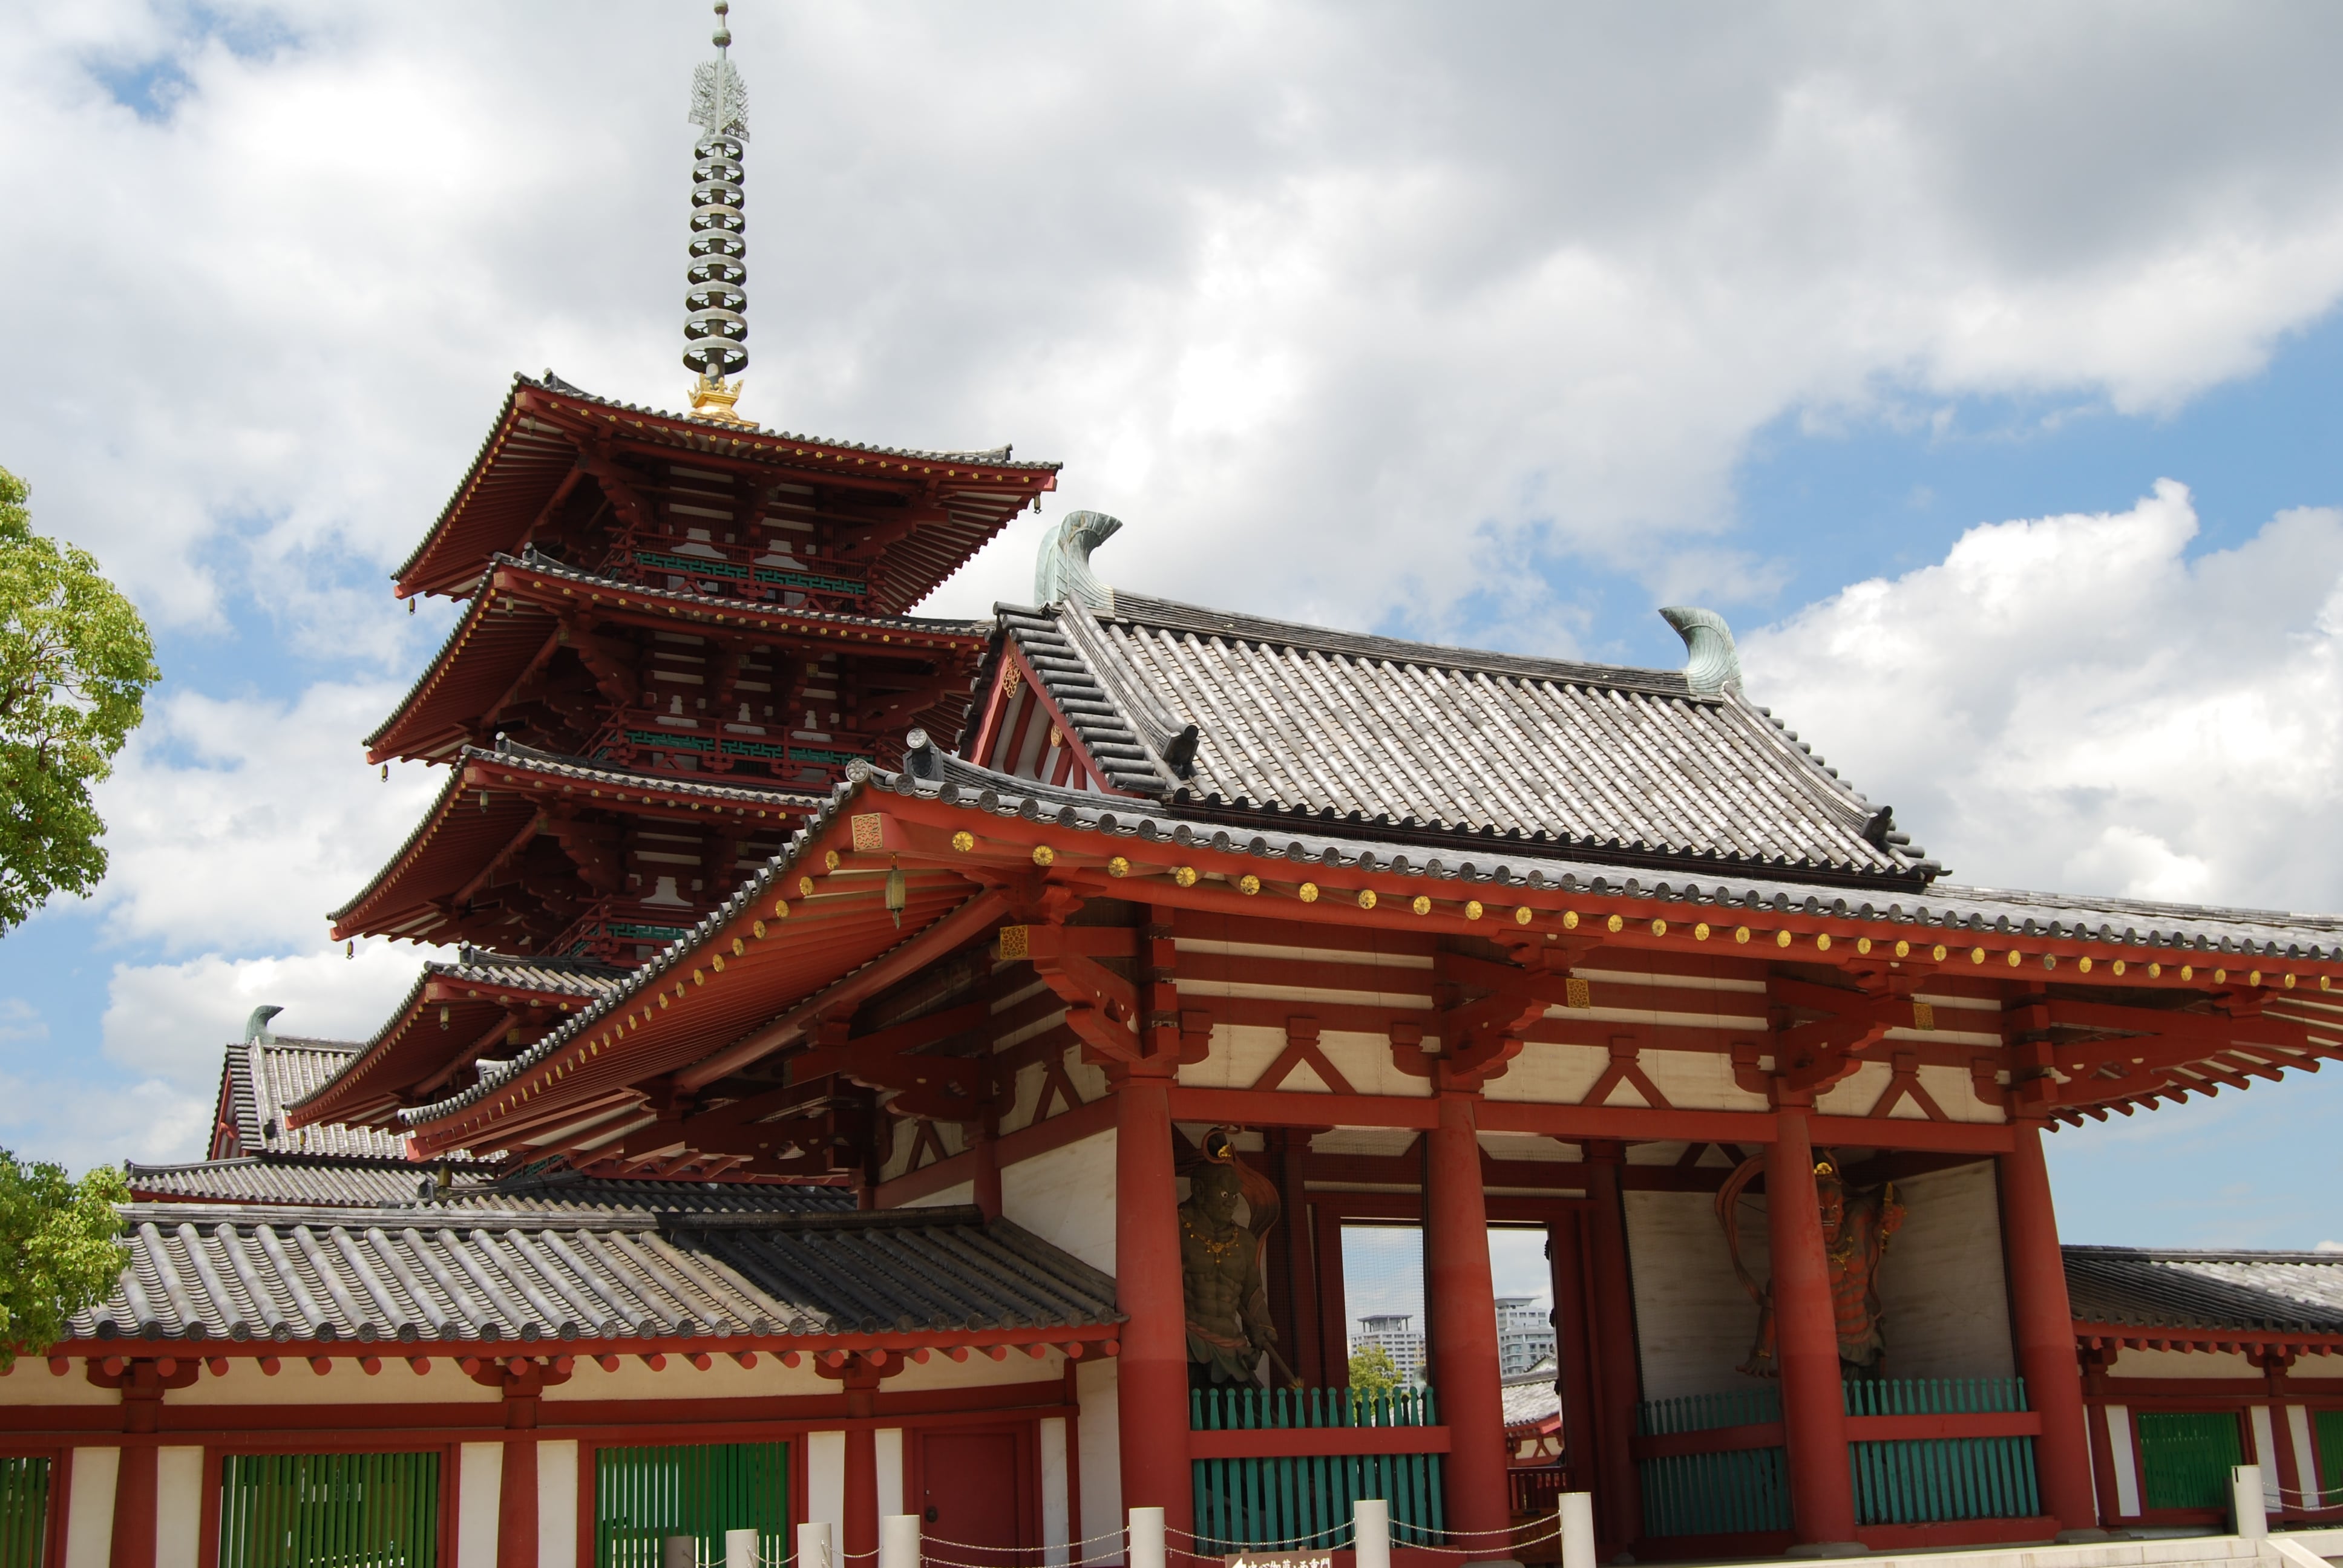 Five-story Pagoda from outside